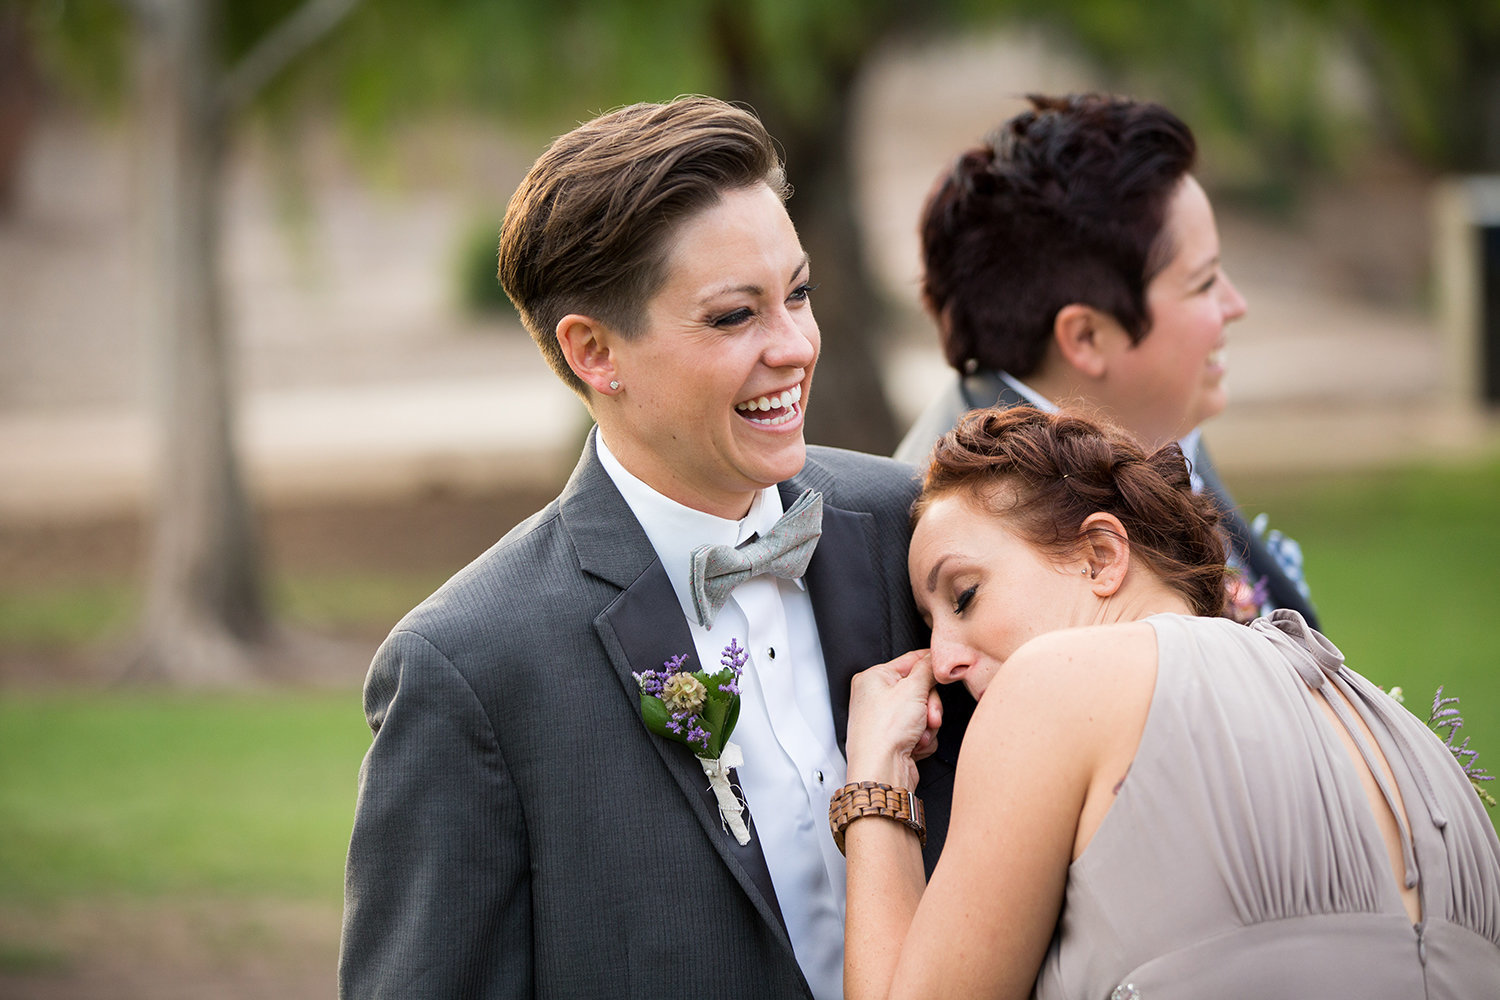 The emotions were high at this beautiful outdoor wedding | LGBT Wedding Ceremony